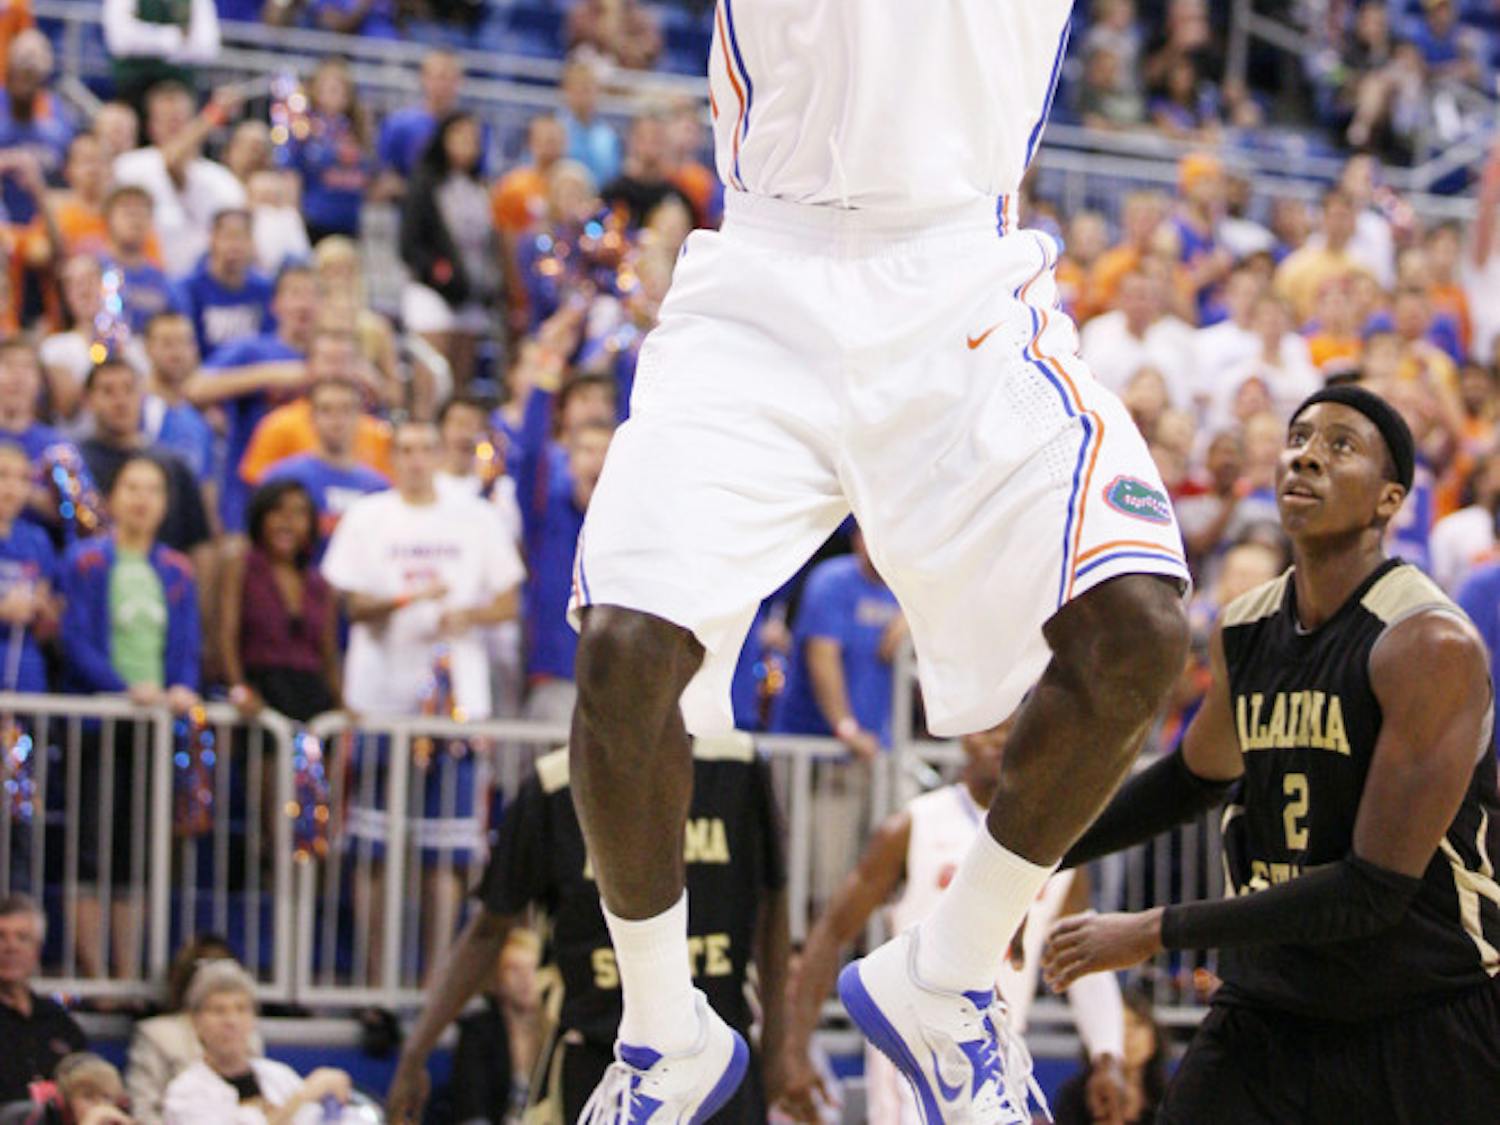 Florida center Patric Young (4) dunks the ball during an 84-35 win  against Alabama State on Nov. 11 at the O’Connell Center. Young scored 12 points and grabbed 12 rebounds in the victory.